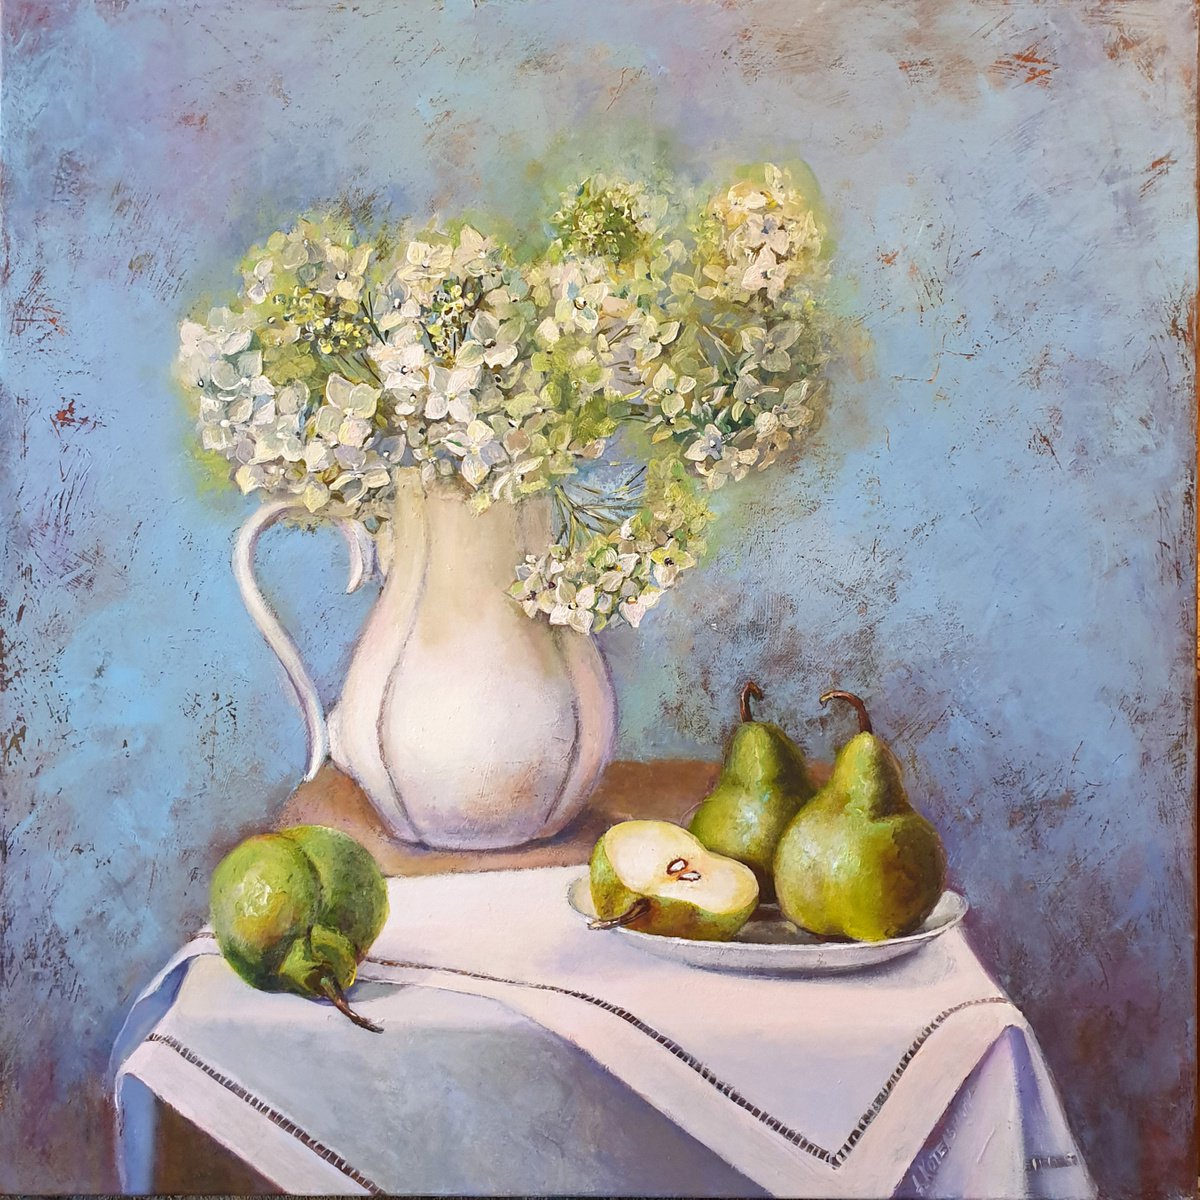 Still Life with Hydrangea and Pears  pears  liGHt original painting PALETTE KNIFE  GIFT... by Anna Kotelnik